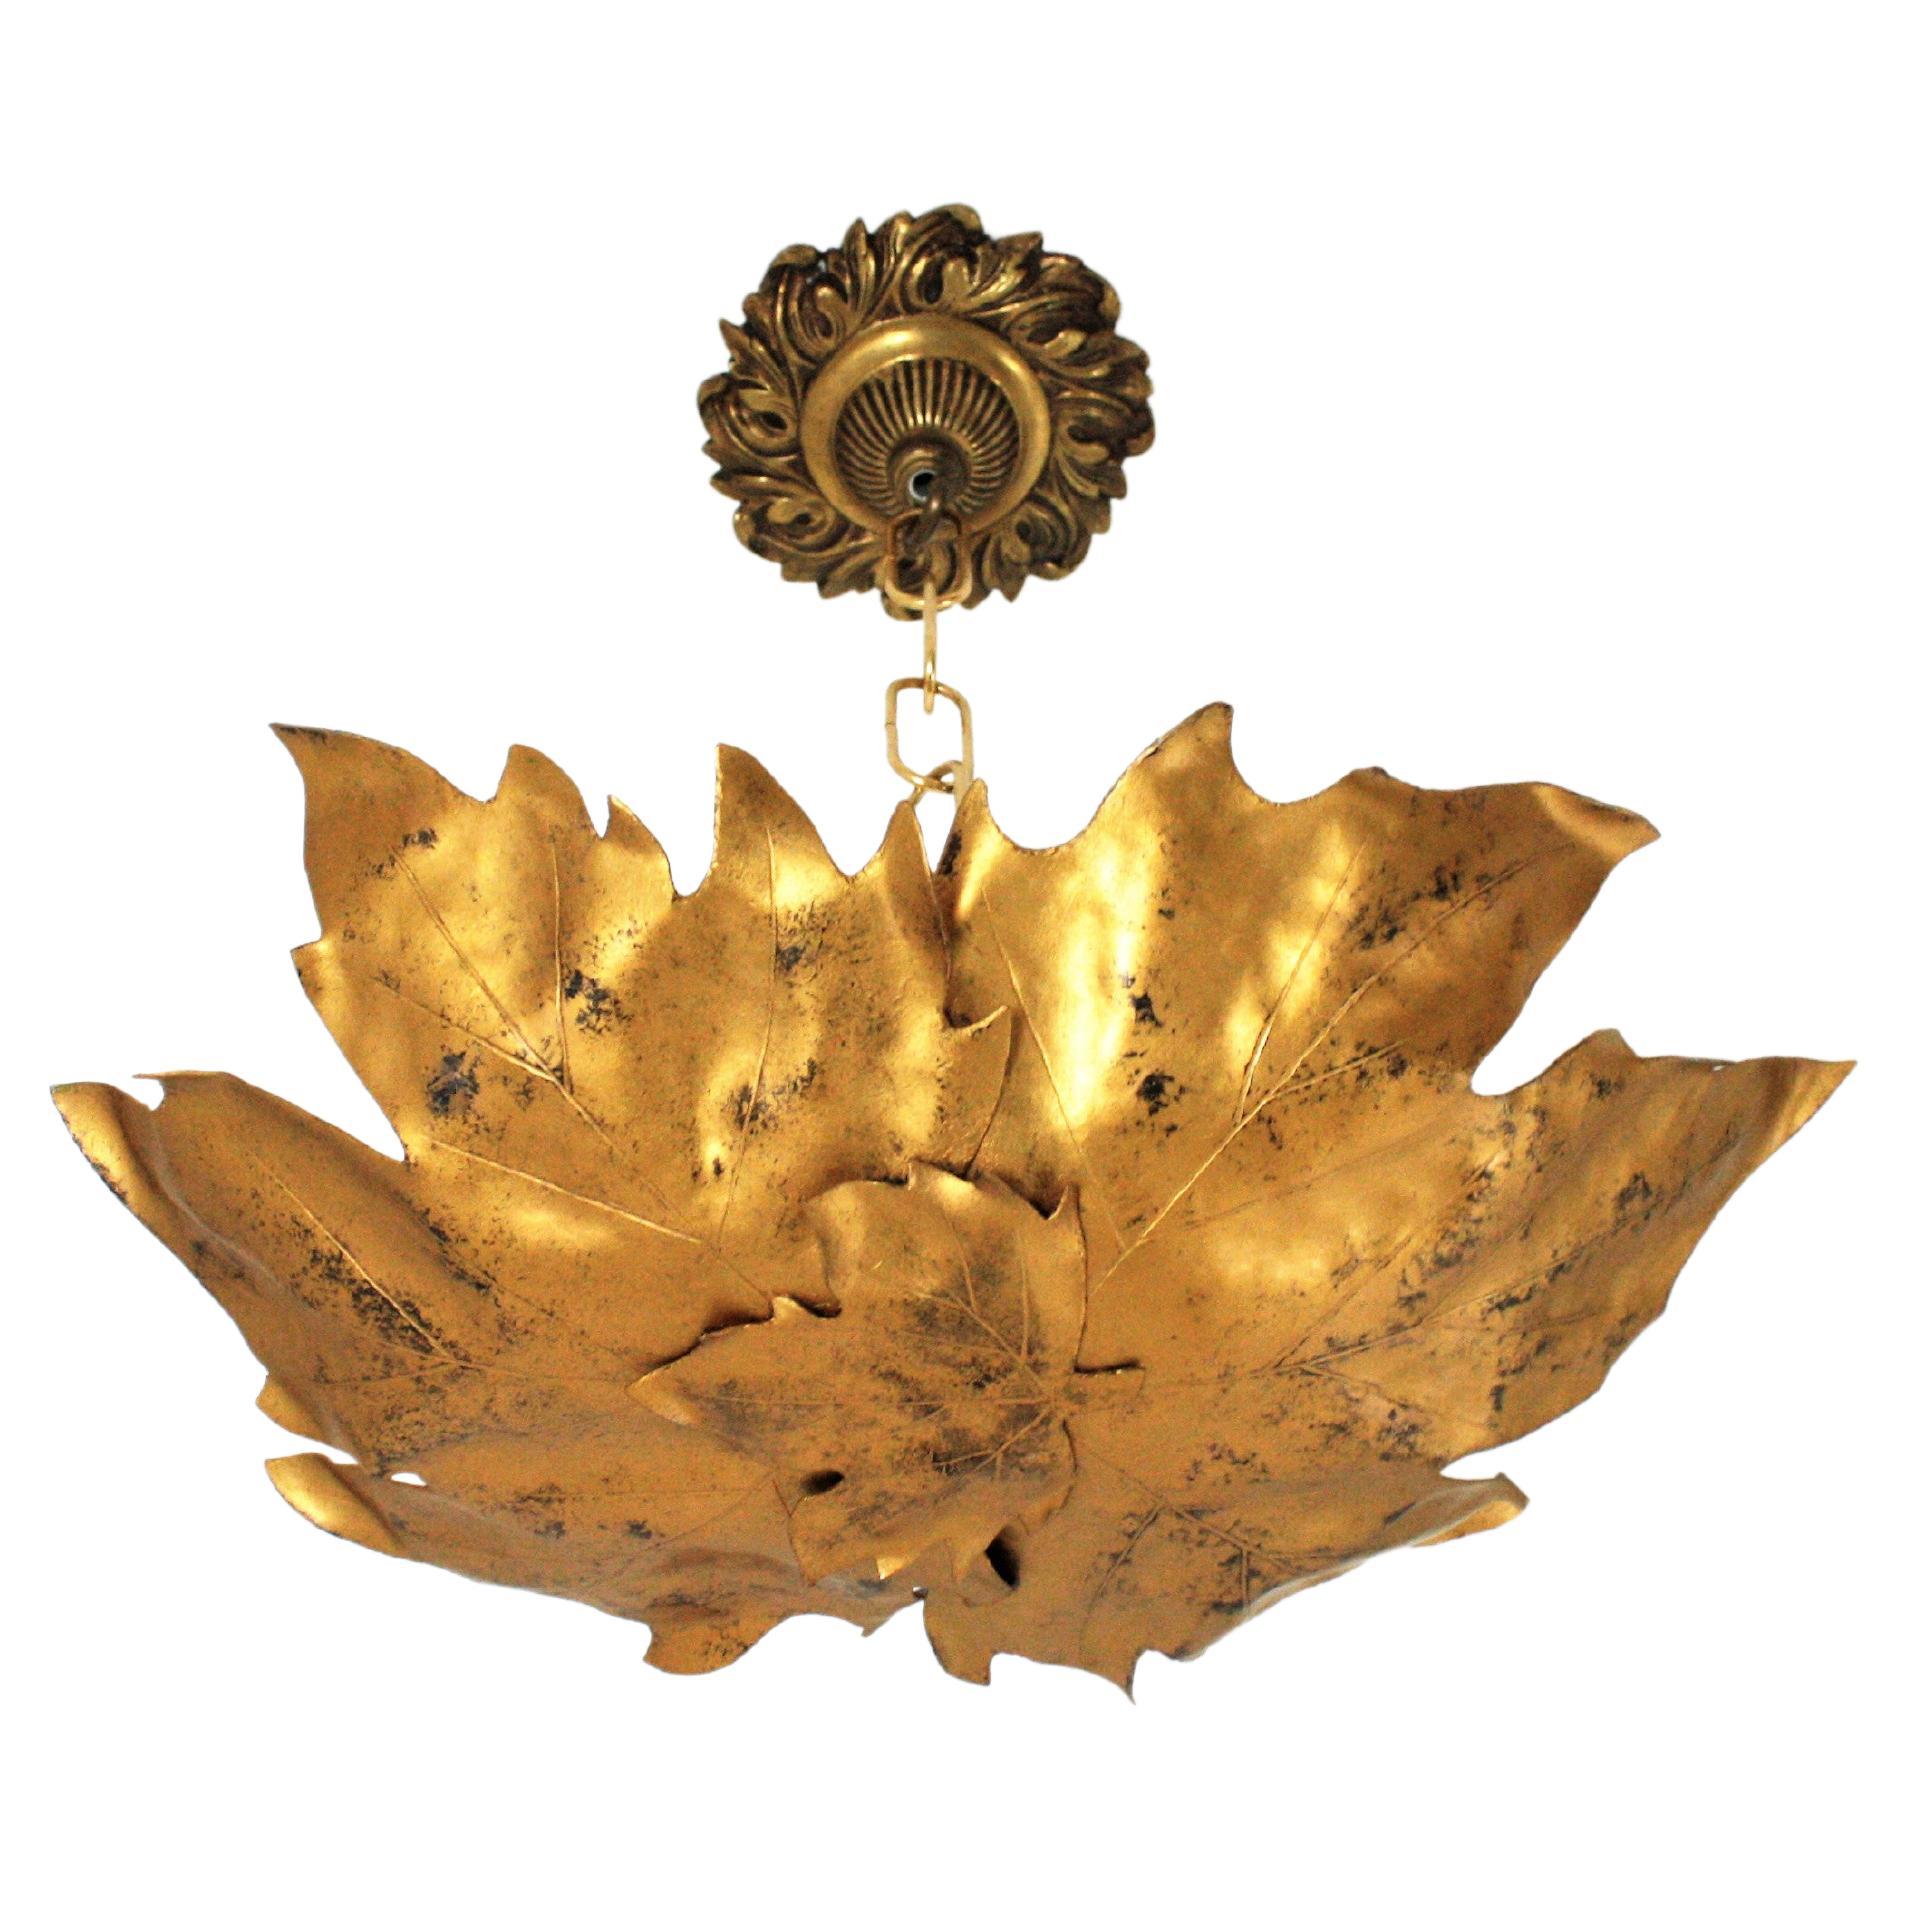 Leaves Shape Ceiling Light Fixture / Wall Sconce in Gilt Metal, 1960s For Sale 9